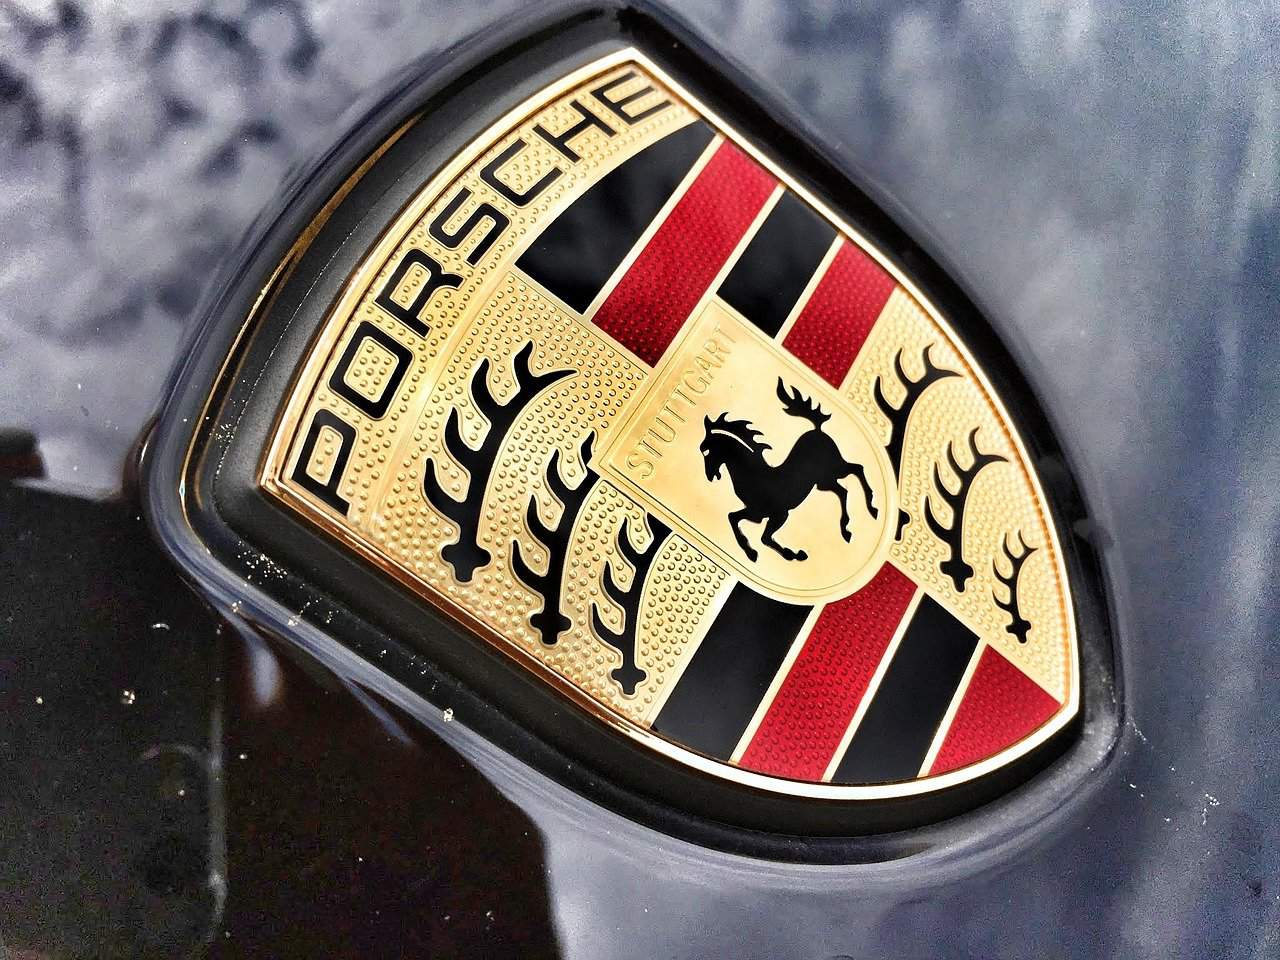 Porsche’s fantastic project! They will create a fairy tale car